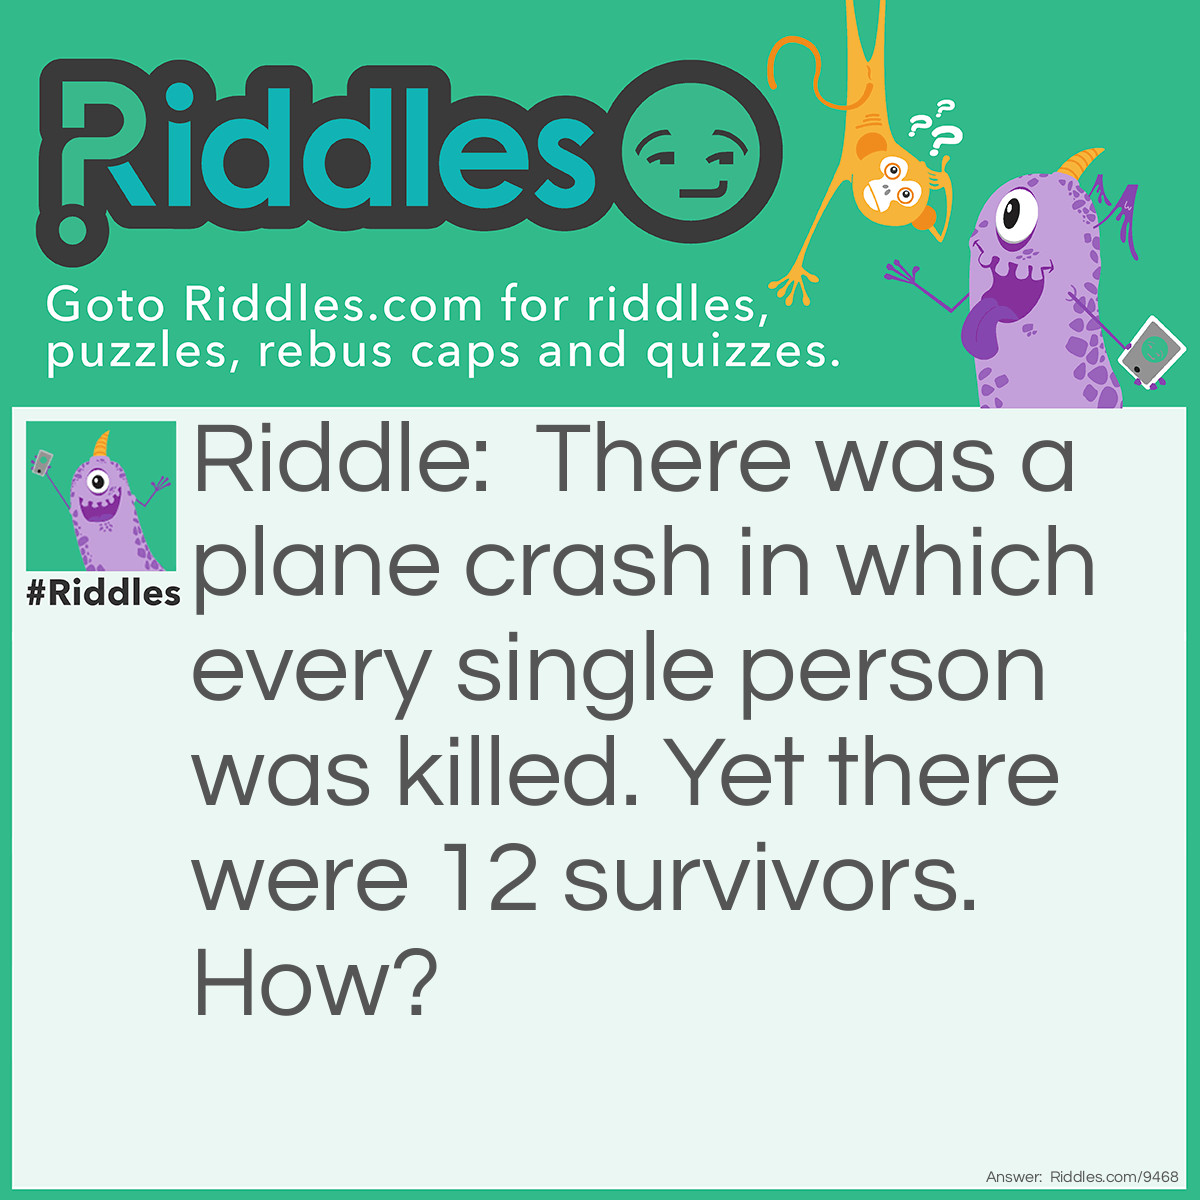 Riddle: There was a plane crash in which every single person was killed. Yet there were 12 survivors. How? Answer: The 12 survivors were married, not single.